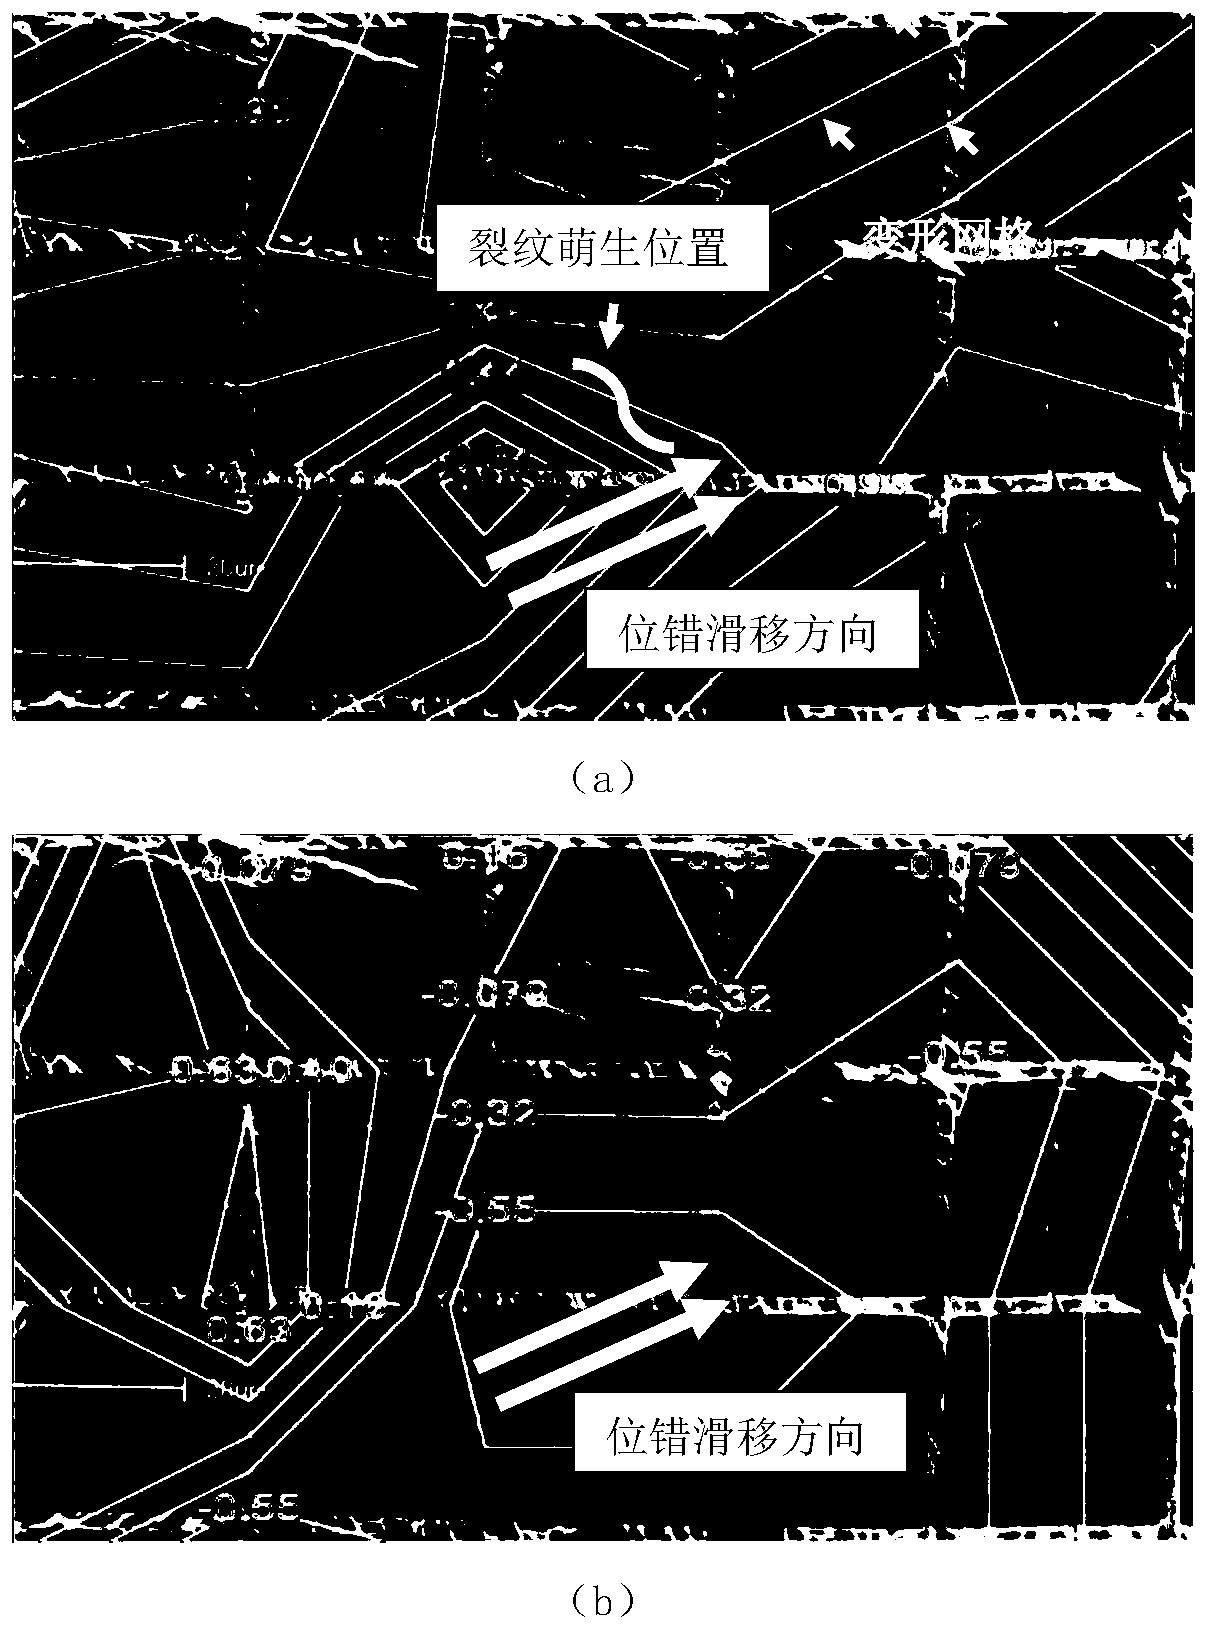 Method for predicting initiation location or expansion direction of cracks on metal surface